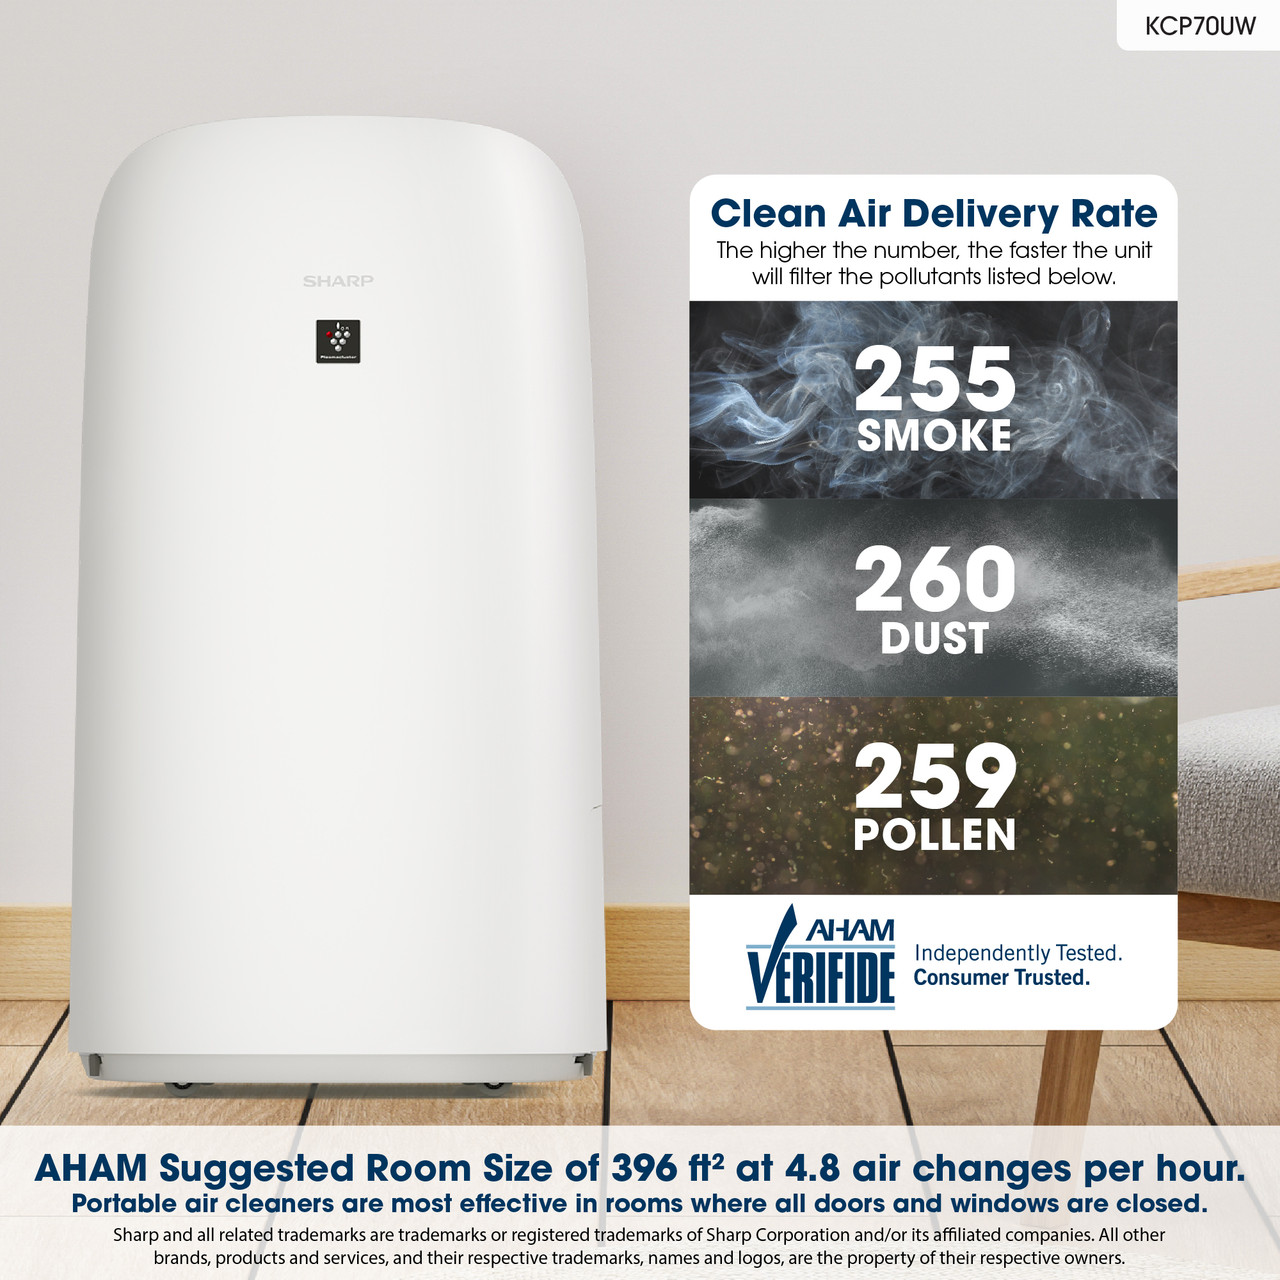 Clean Air Delivery Rate
The higher the number, the faster the unit will filter the pollutants listed below.
255 SMOKE
260 DUST
259 POLLEN
AHAM VERIFIDE
Independently Tested. Consumer Trusted.
AHAM Suggested Room Size of 396 ft2 at 4.8 air changes per hour.
Portable air cleaners are most effective in rooms where all doors and windows are closed. Sharp and all related trademarks are trademarks or registered trademarks of Sharp Corporation and/or its affiliated companies. All other brands, products and services, and their respective trademarks, names and logos, are the property of their respective owners.
KCP70UW